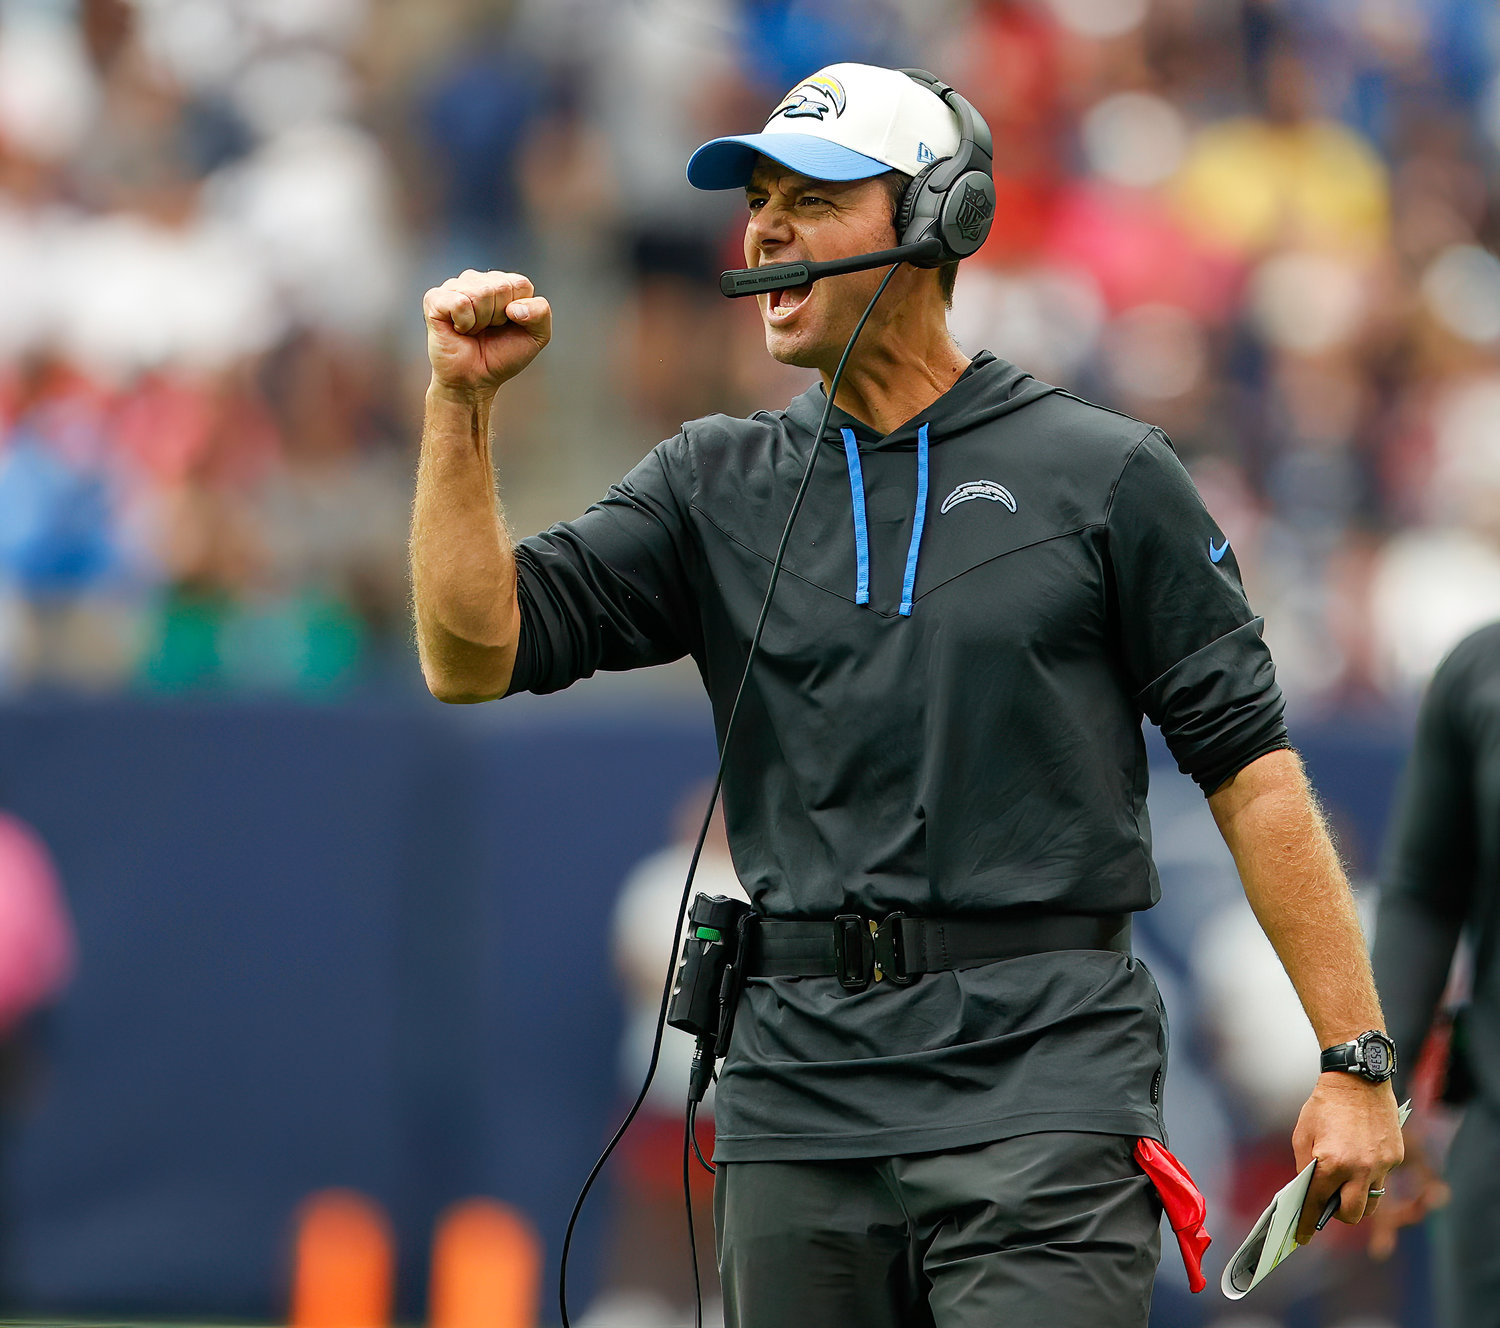 Los Angeles Chargers head coach Brandon Staley reacts to a Chargers touchdown during an NFL game between the Texans and the Chargers on Oct. 2, 2022 in Houston. The Chargers won 34-24.